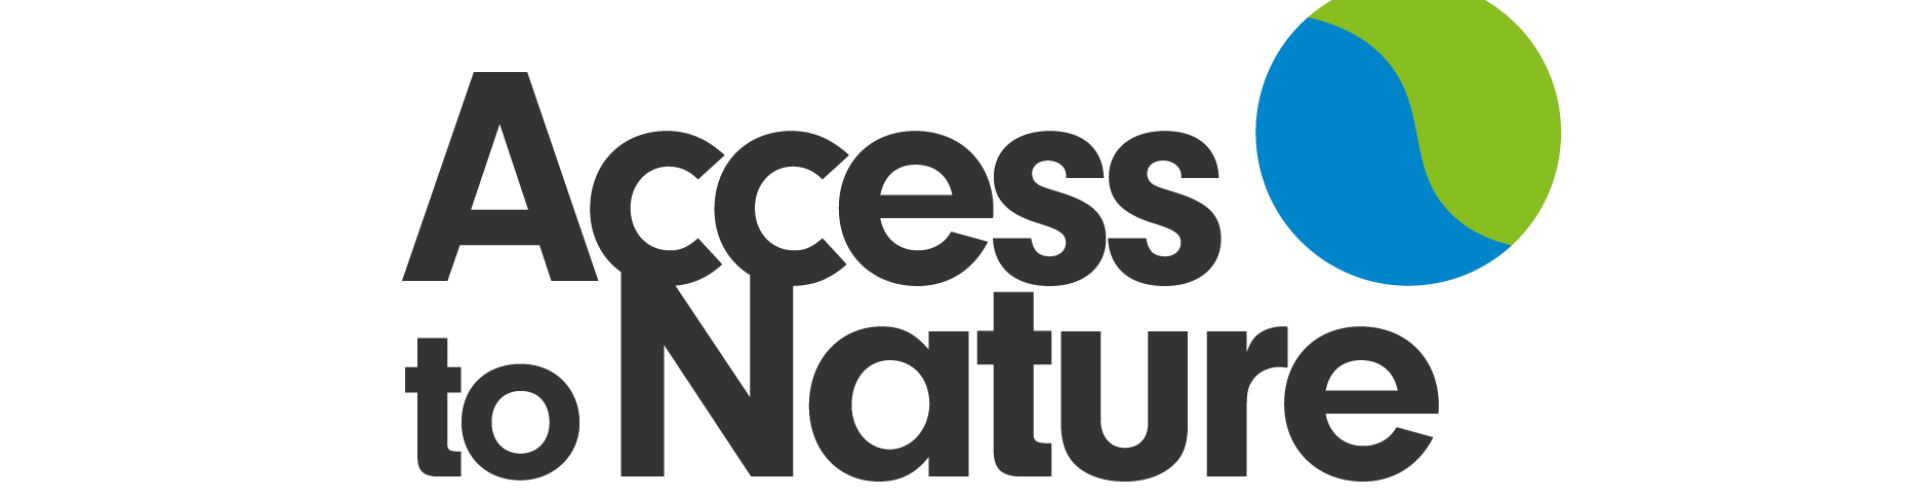 Picture is of a logo with black text saying Access to Nature with a blue and green globe graphic on the top right hand corner.